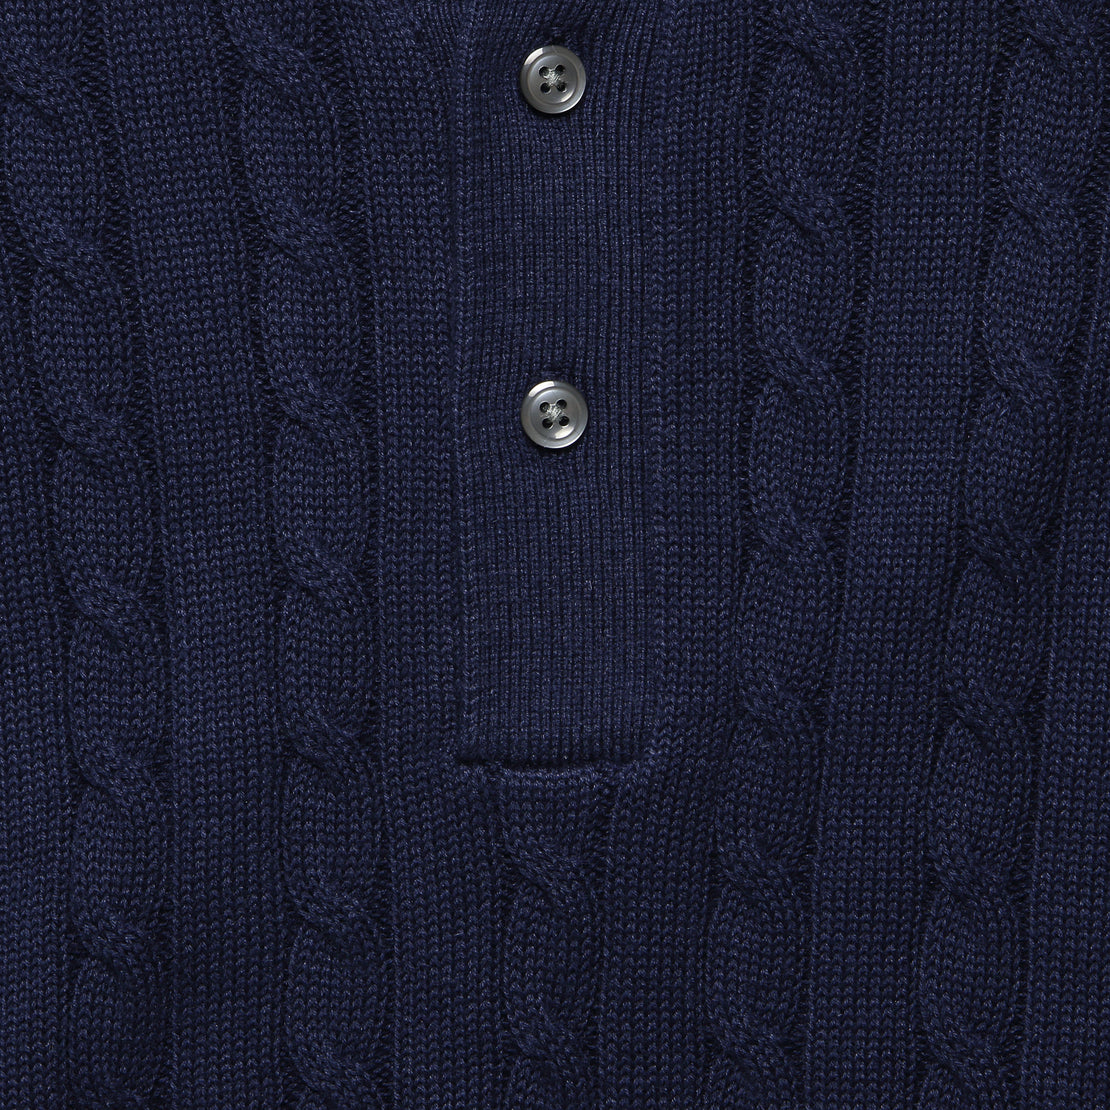 Cable Knit Polo - Navy - BEAMS+ - STAG Provisions - Tops - S/S Knit